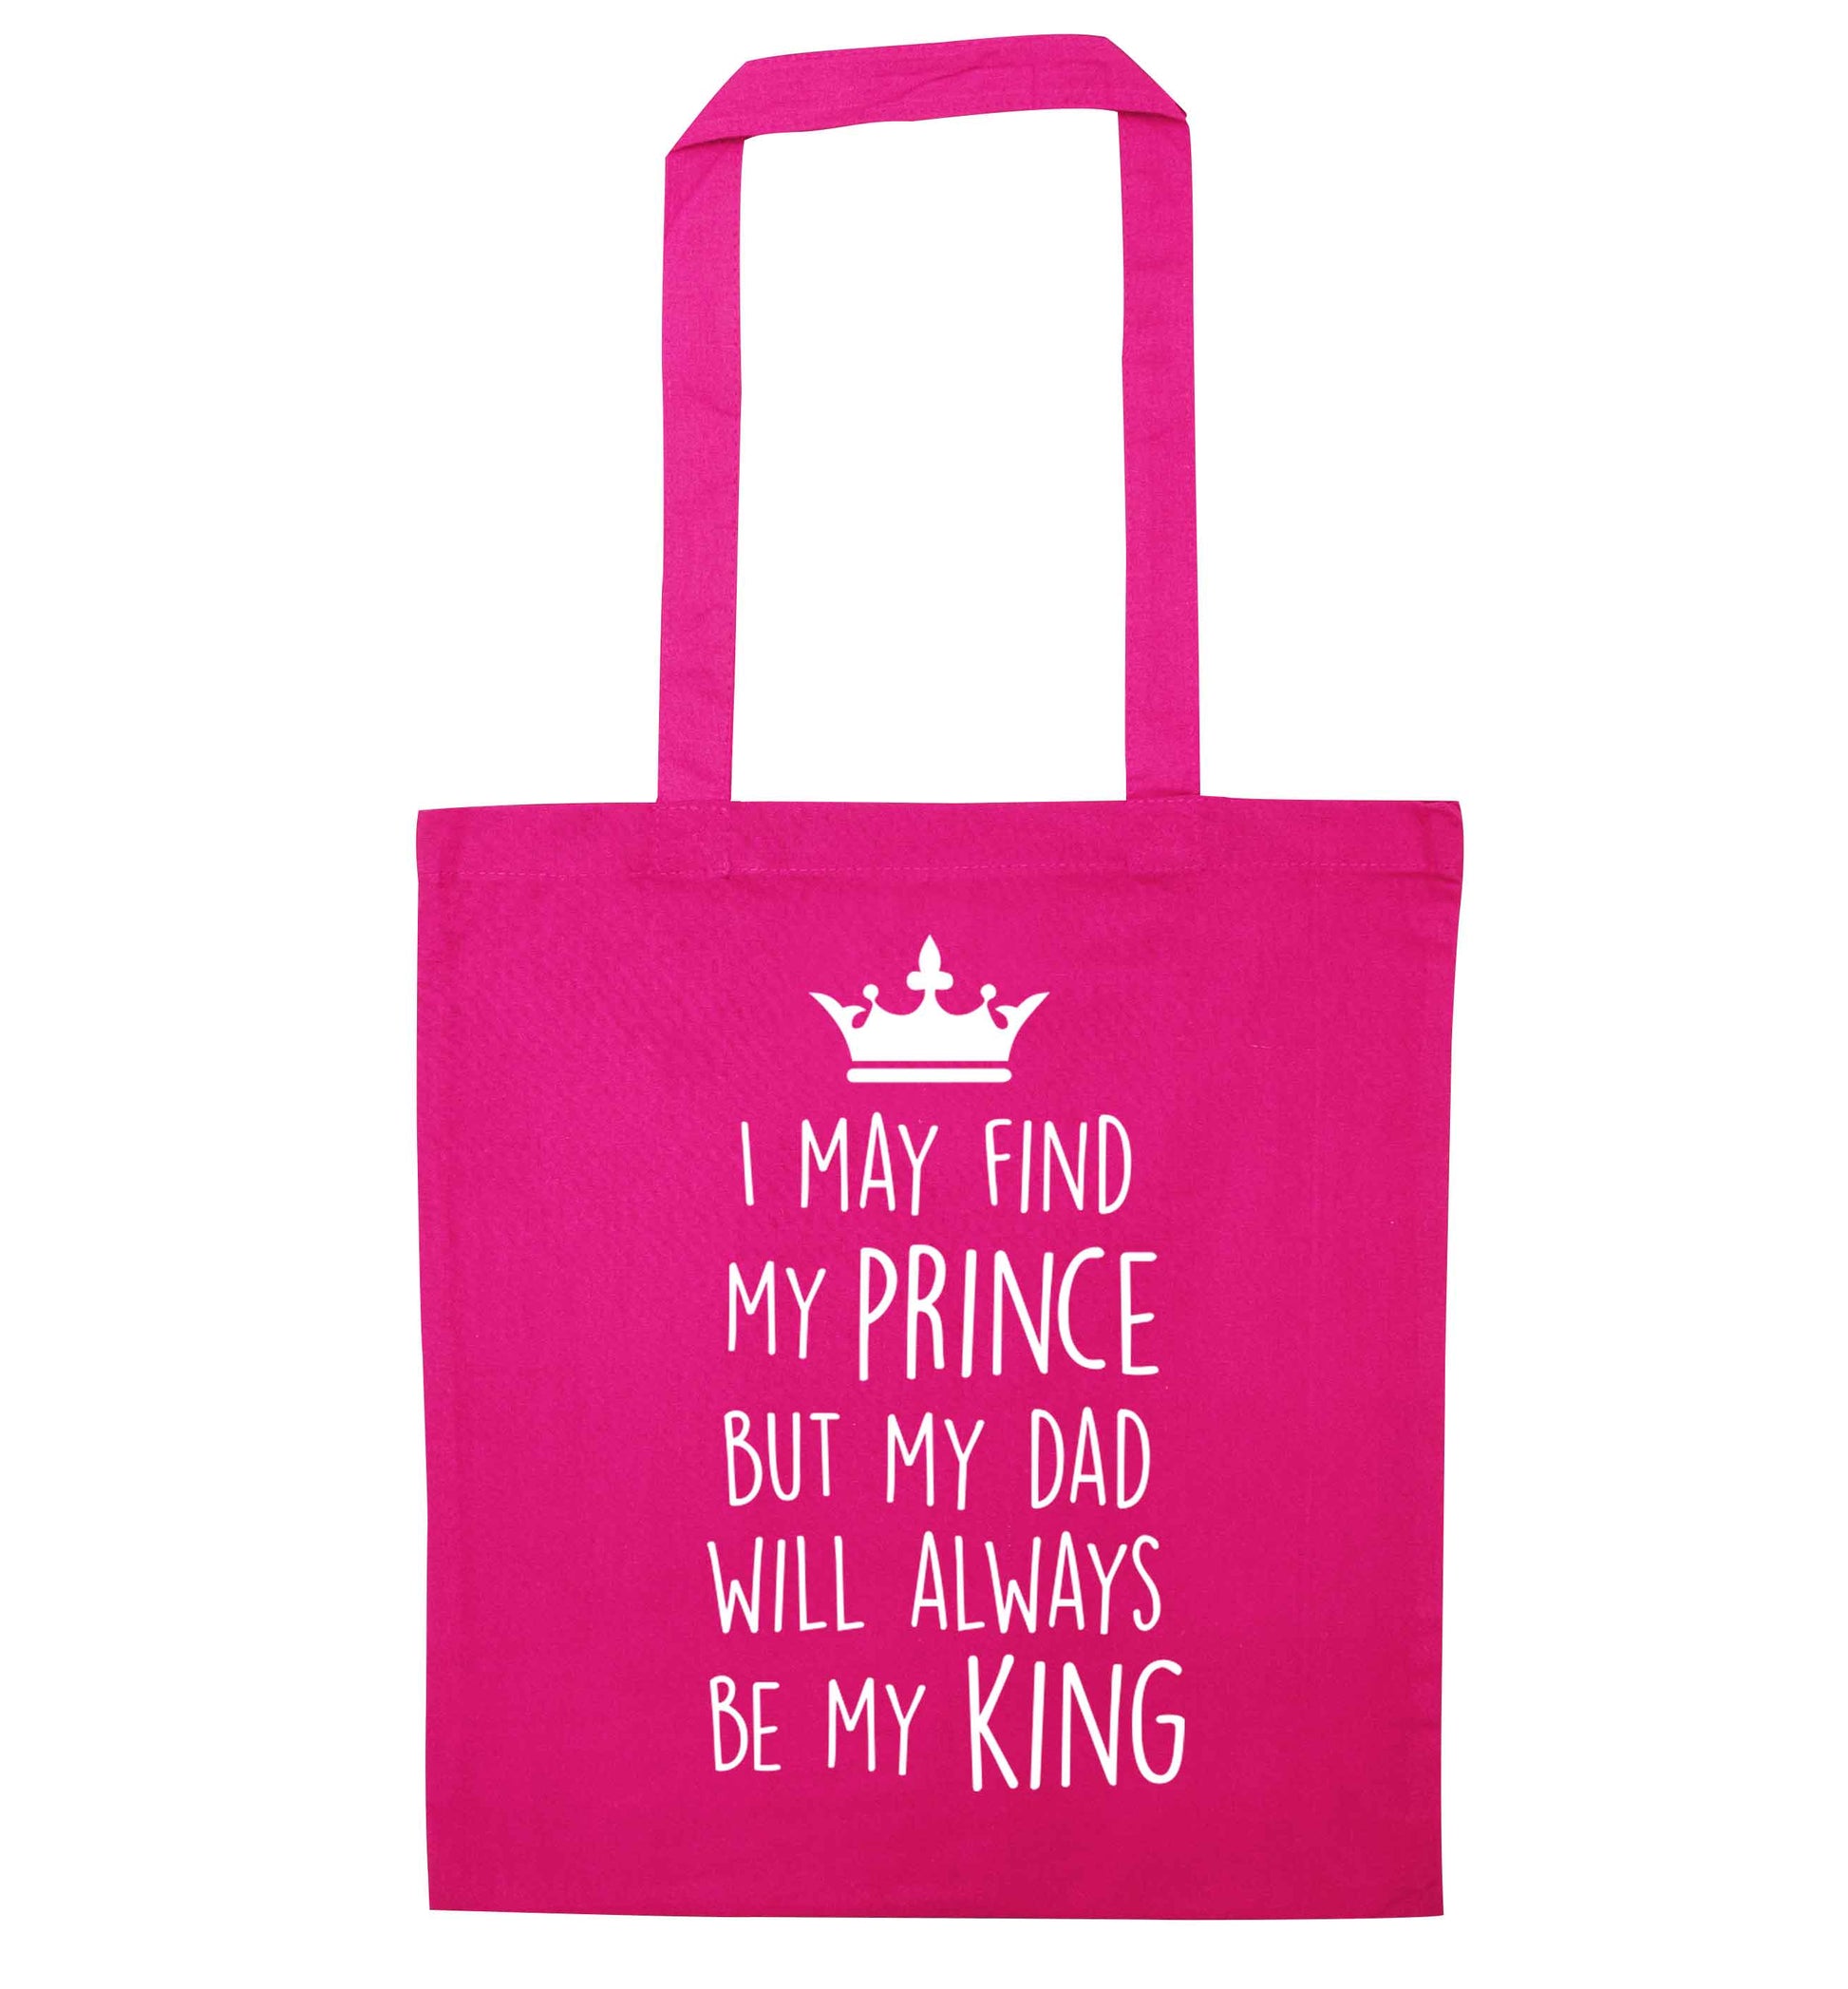 I may find my prince but my dad will always be my king pink tote bag